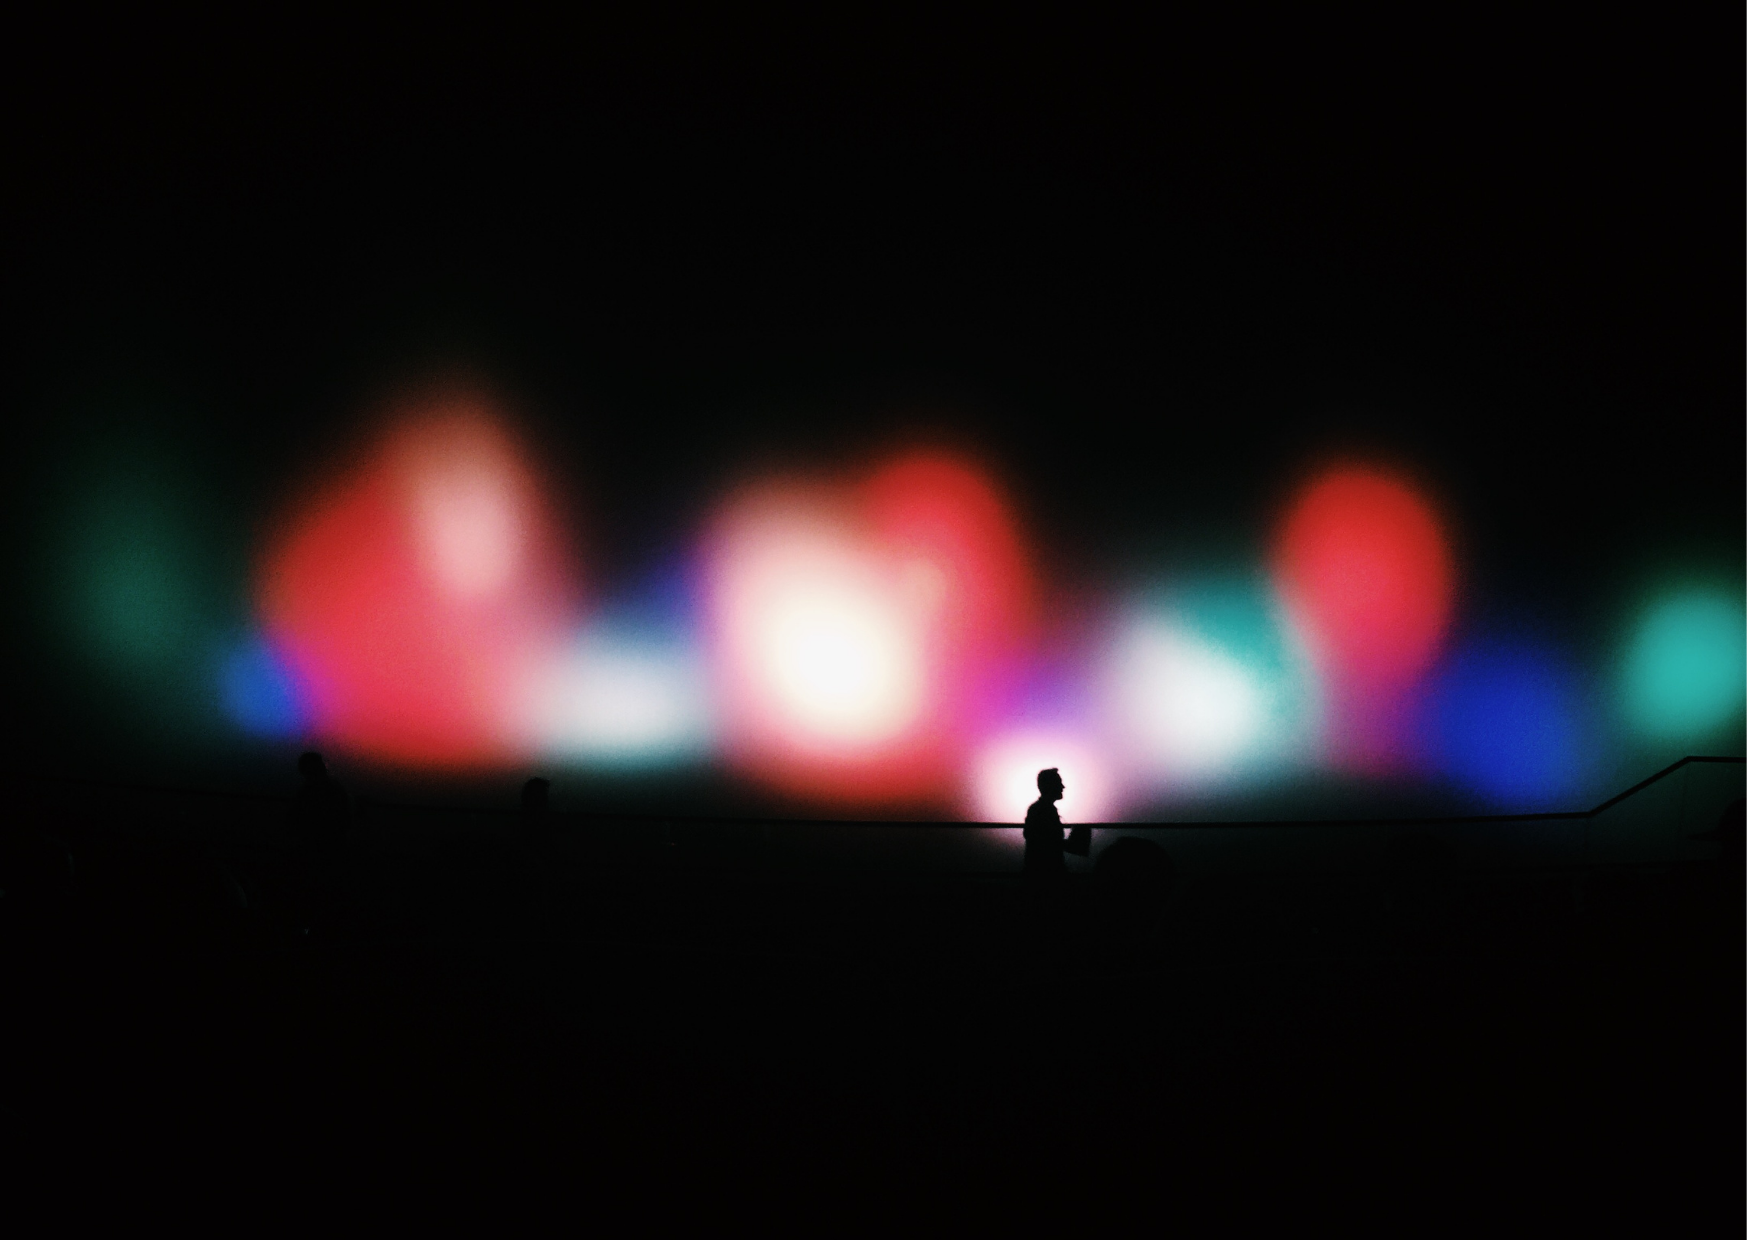 a silhouette of a person standing in front of a colorful light